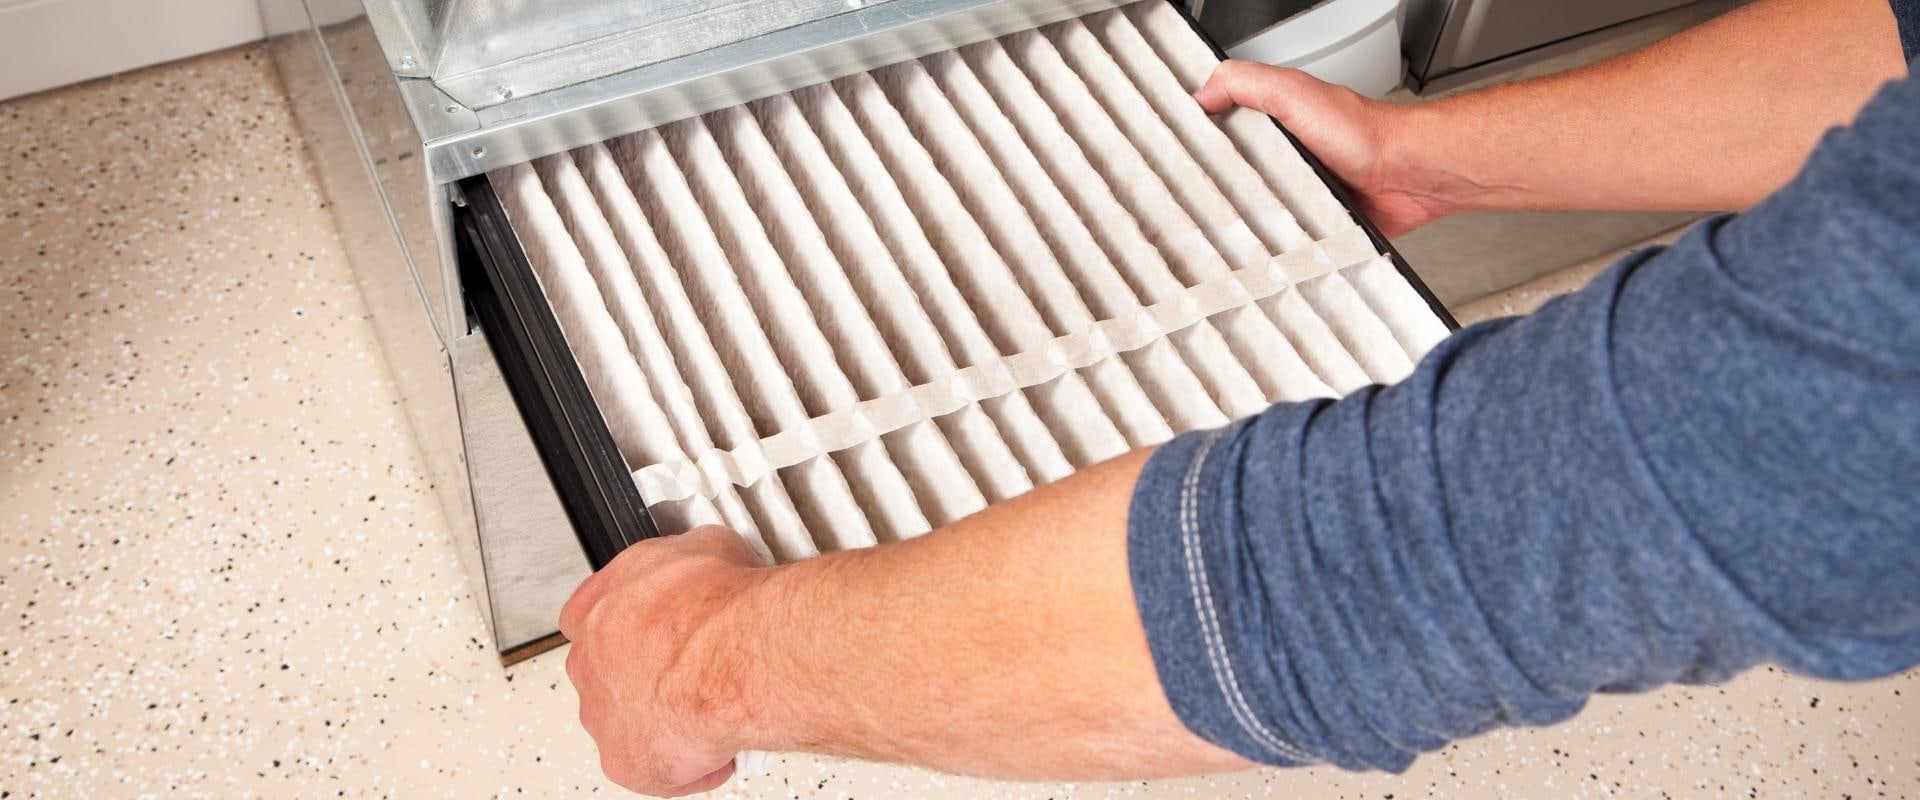 The Benefits of 10x20x1 AC Furnace Home Air Filters in Ensuring Quality Duct Repairs